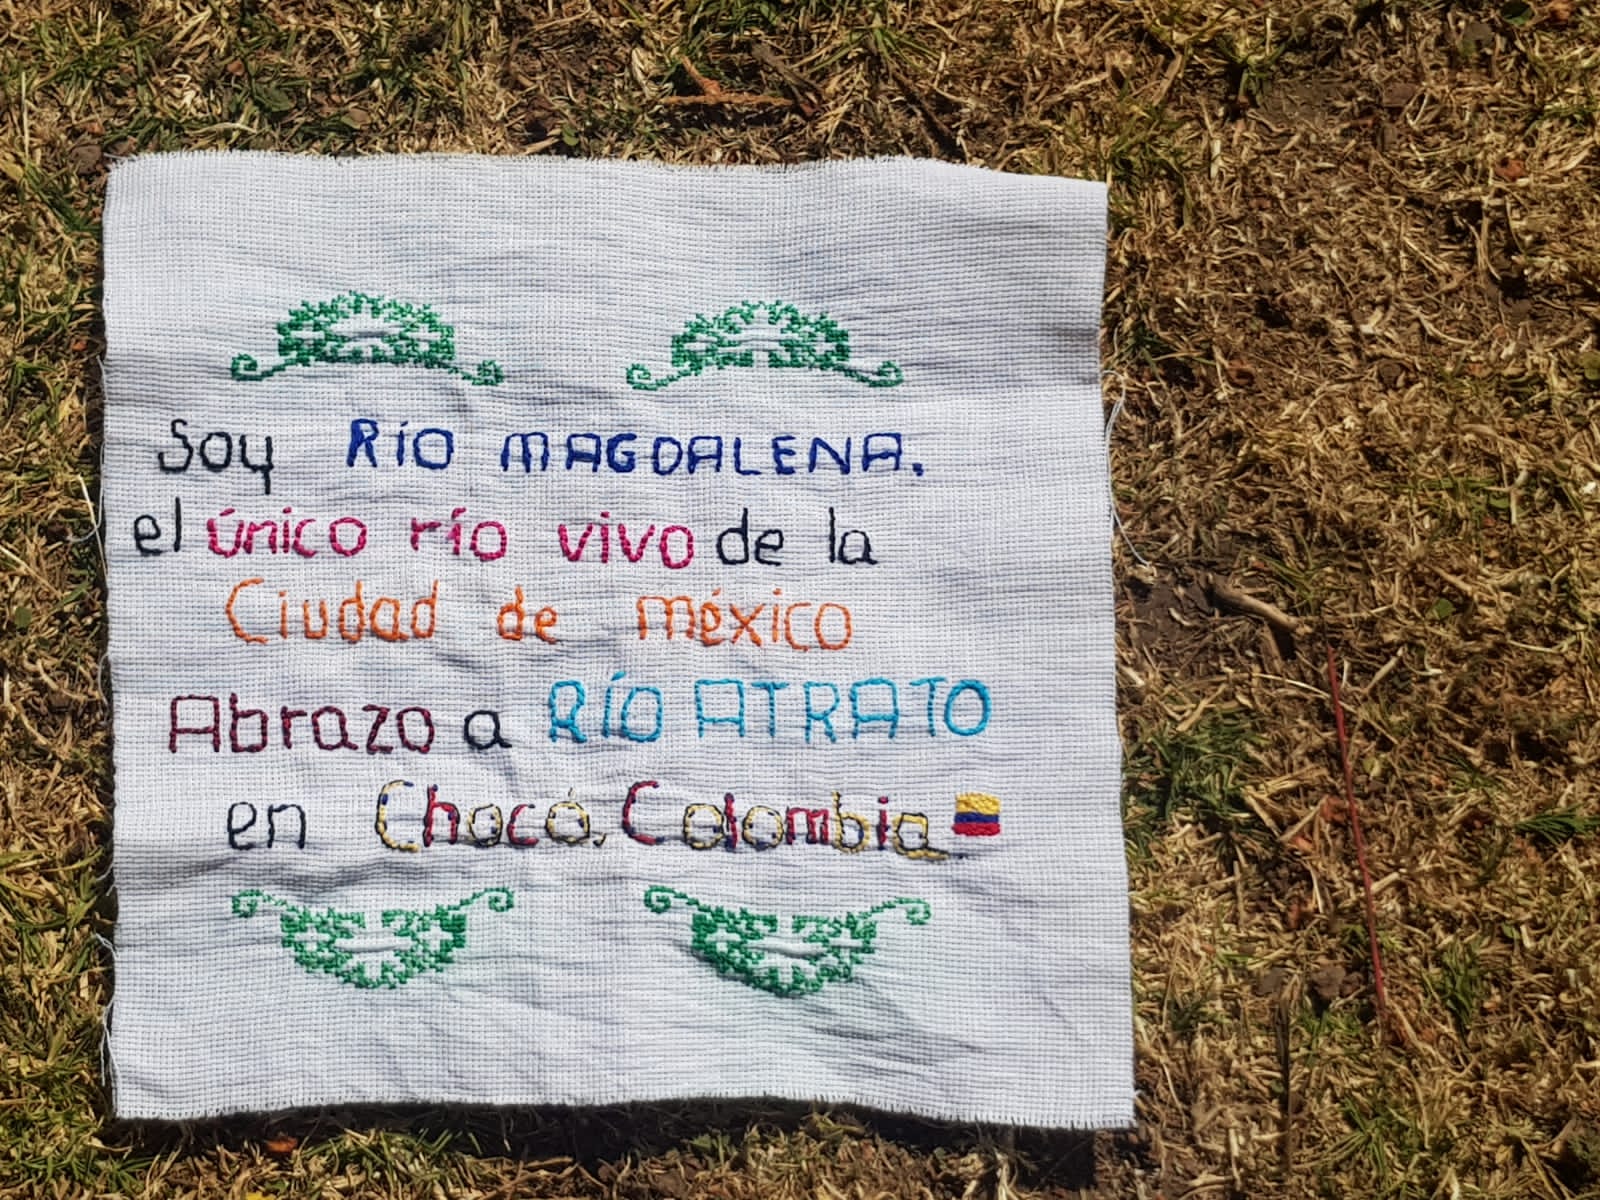 Crotched message on fabric on gravel beach